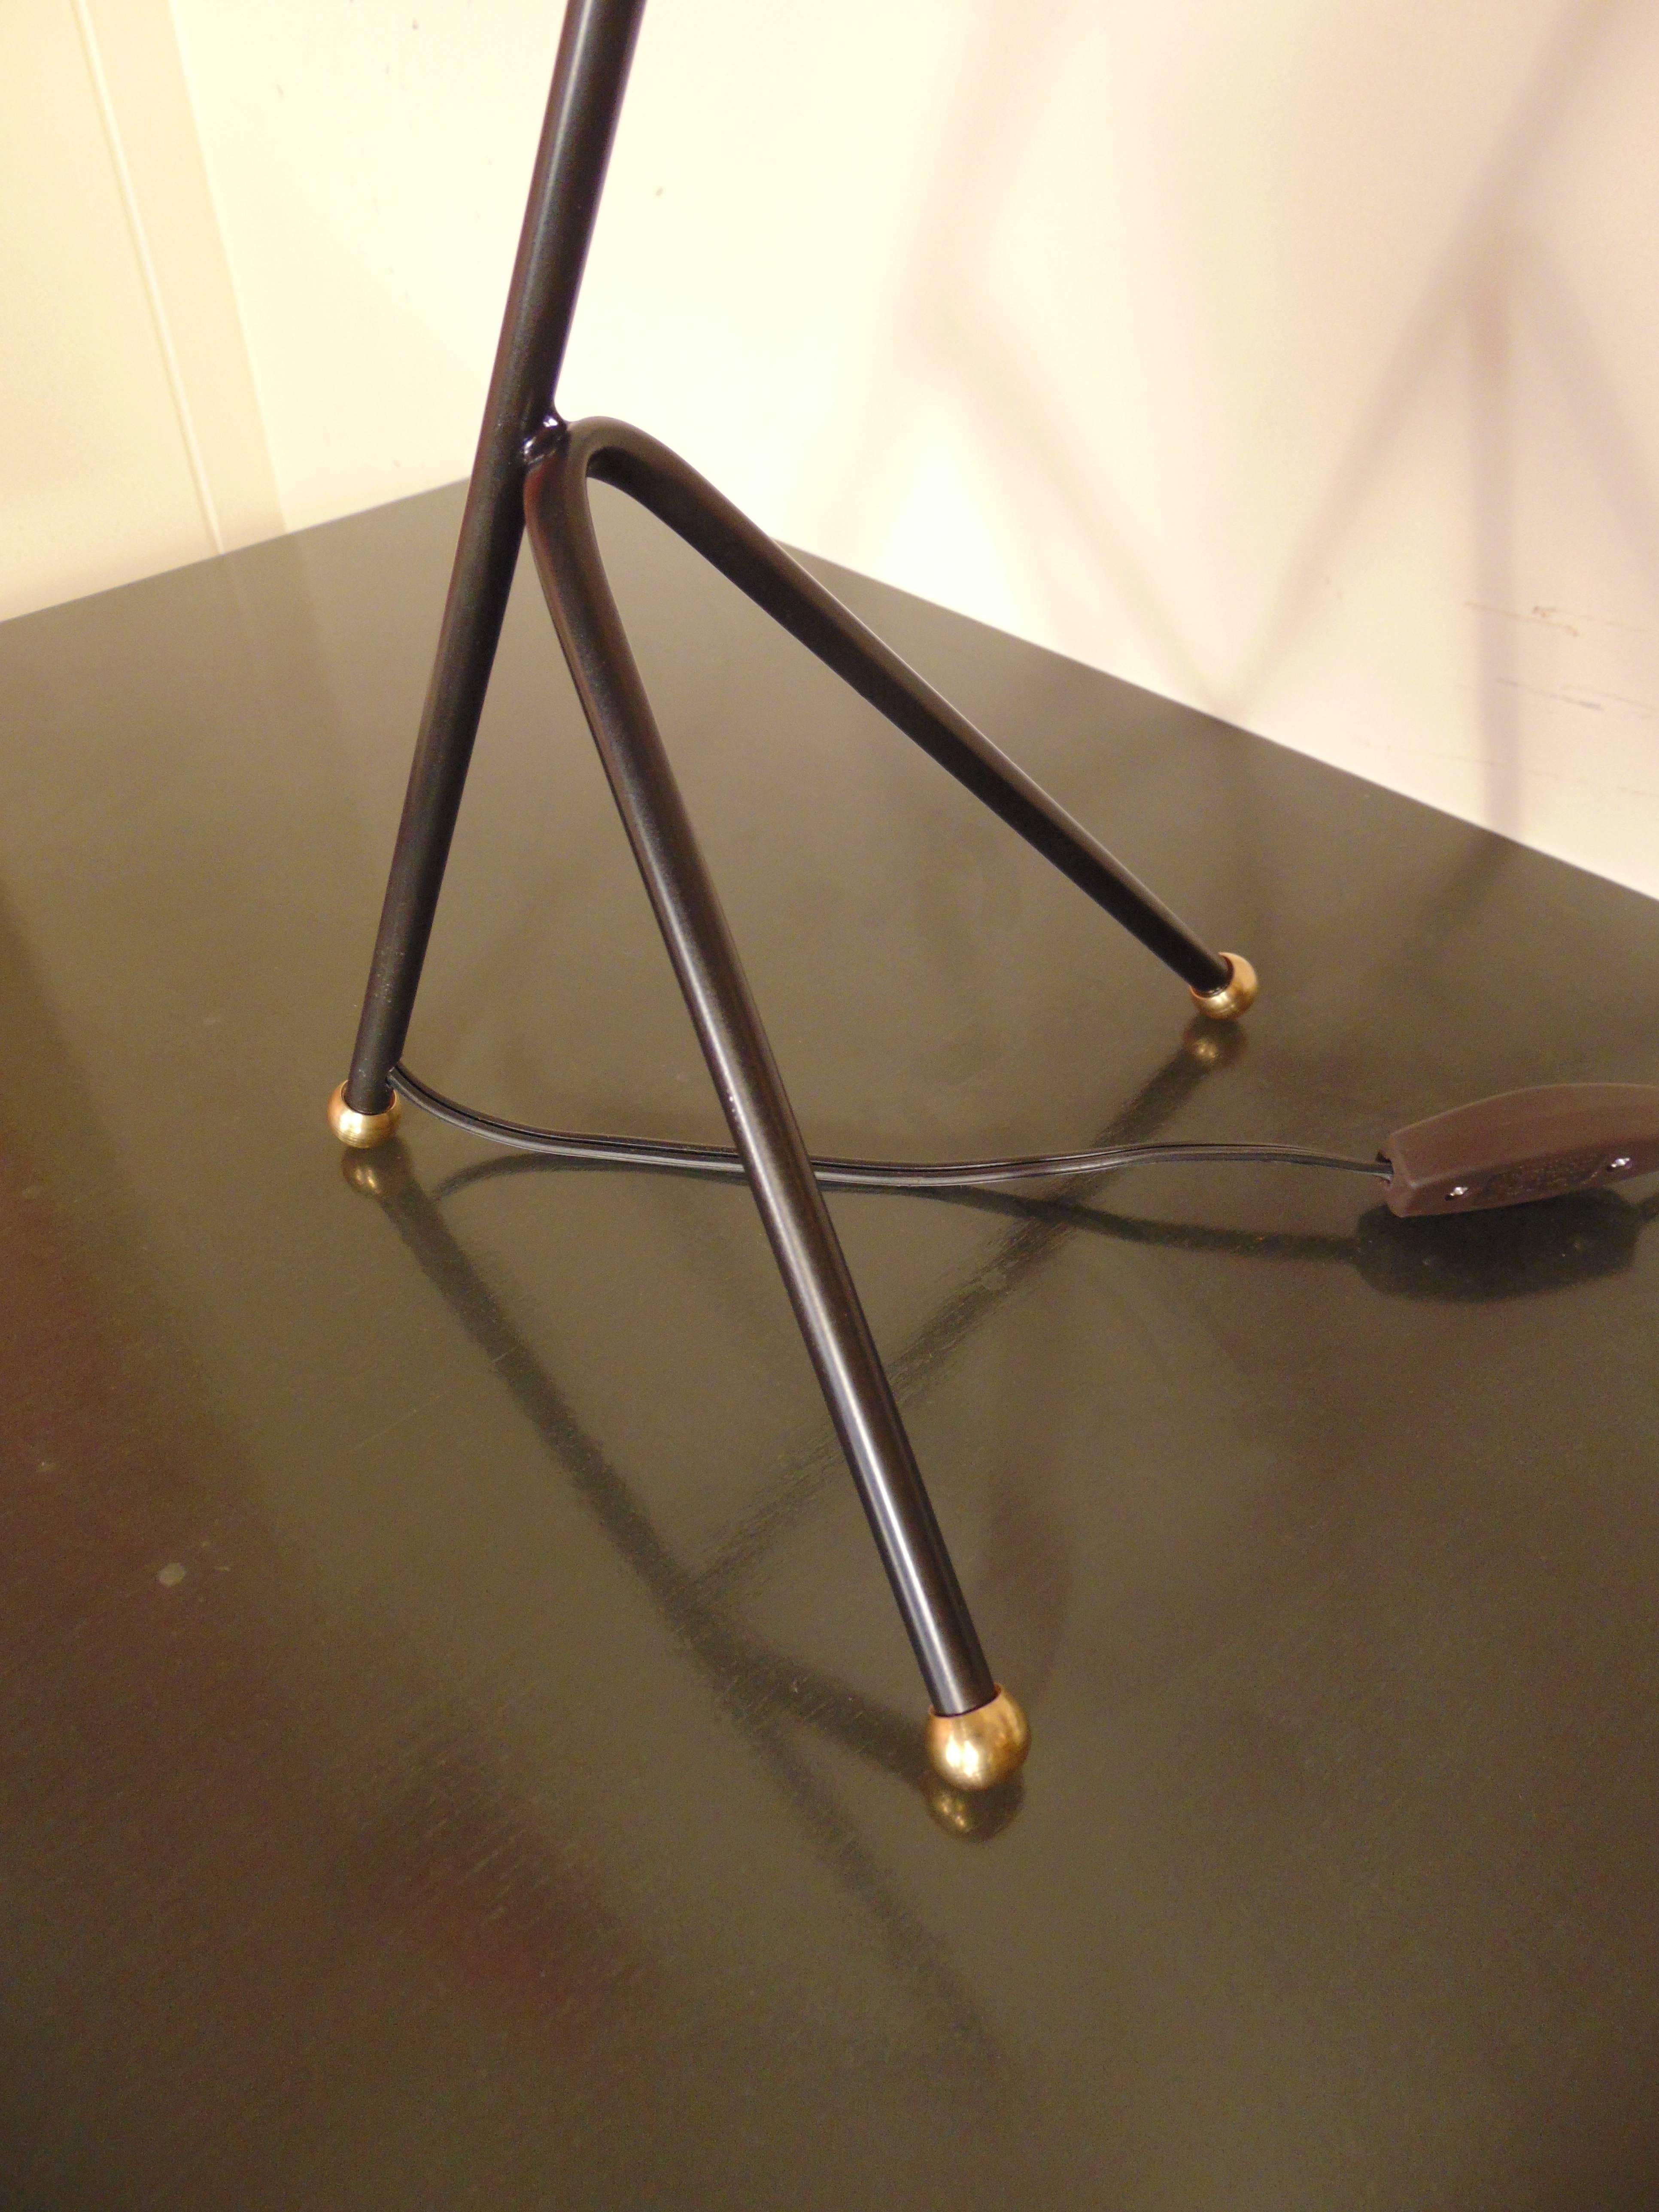 A Vanguard table lamp by Lou Blass. Handmade welded steel with bronze with brass details.